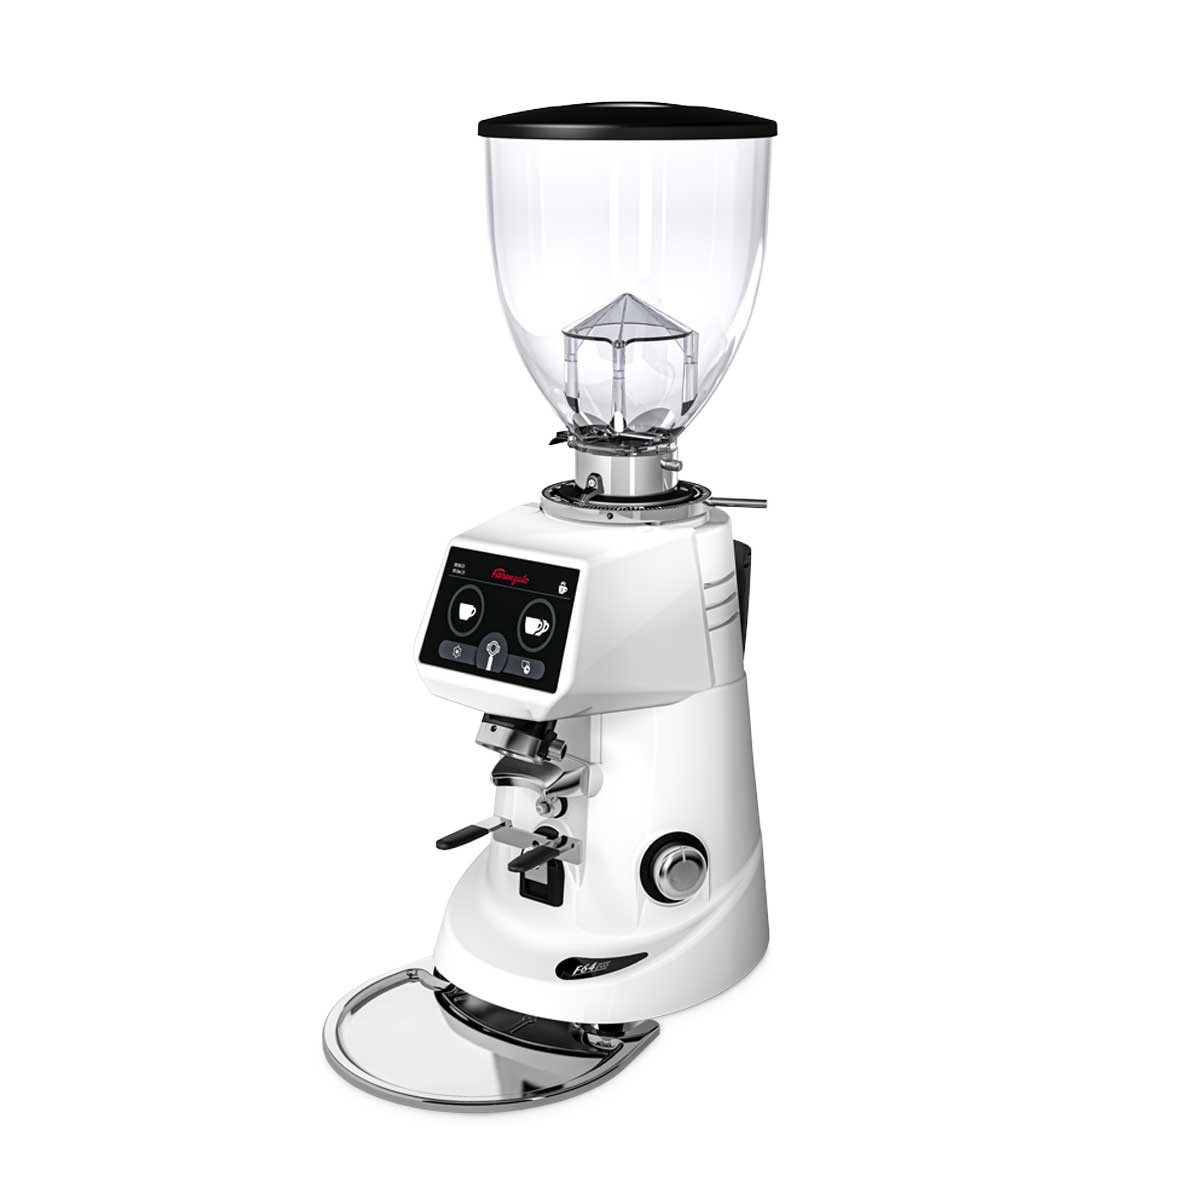 Professional Electric Coffee Grinder,110V 350W Espresso Coffee Grinder Burr  Mill Machine for Home Commercial Burr+Hopper